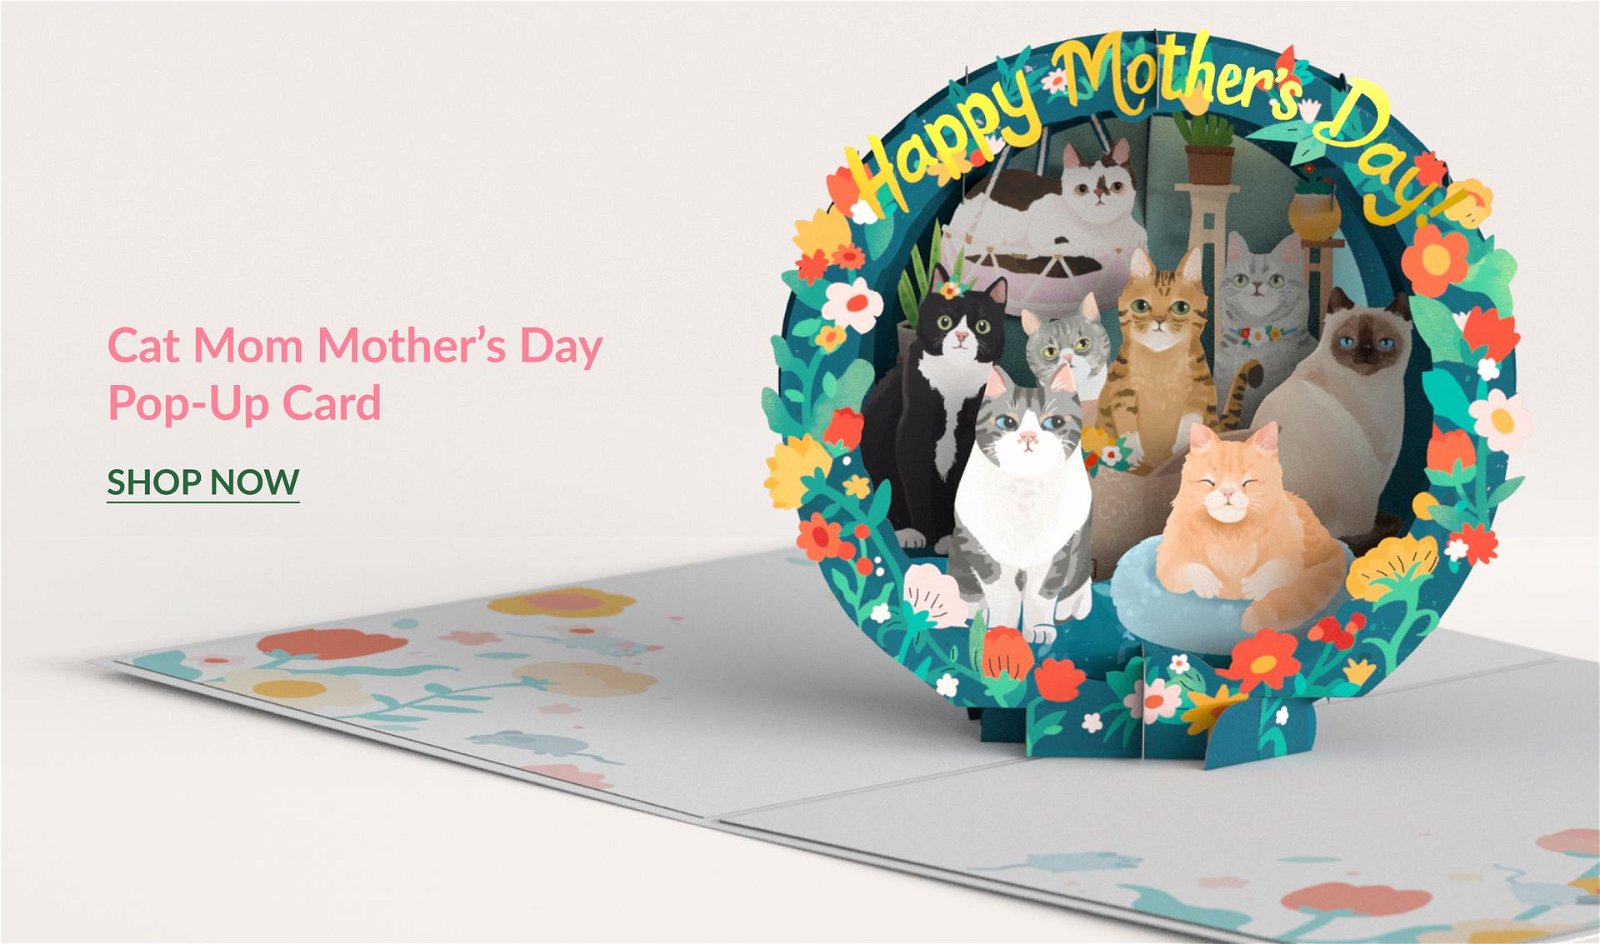 Cat Mom Mother’s Day Pop-Up Card | SHOP NOW